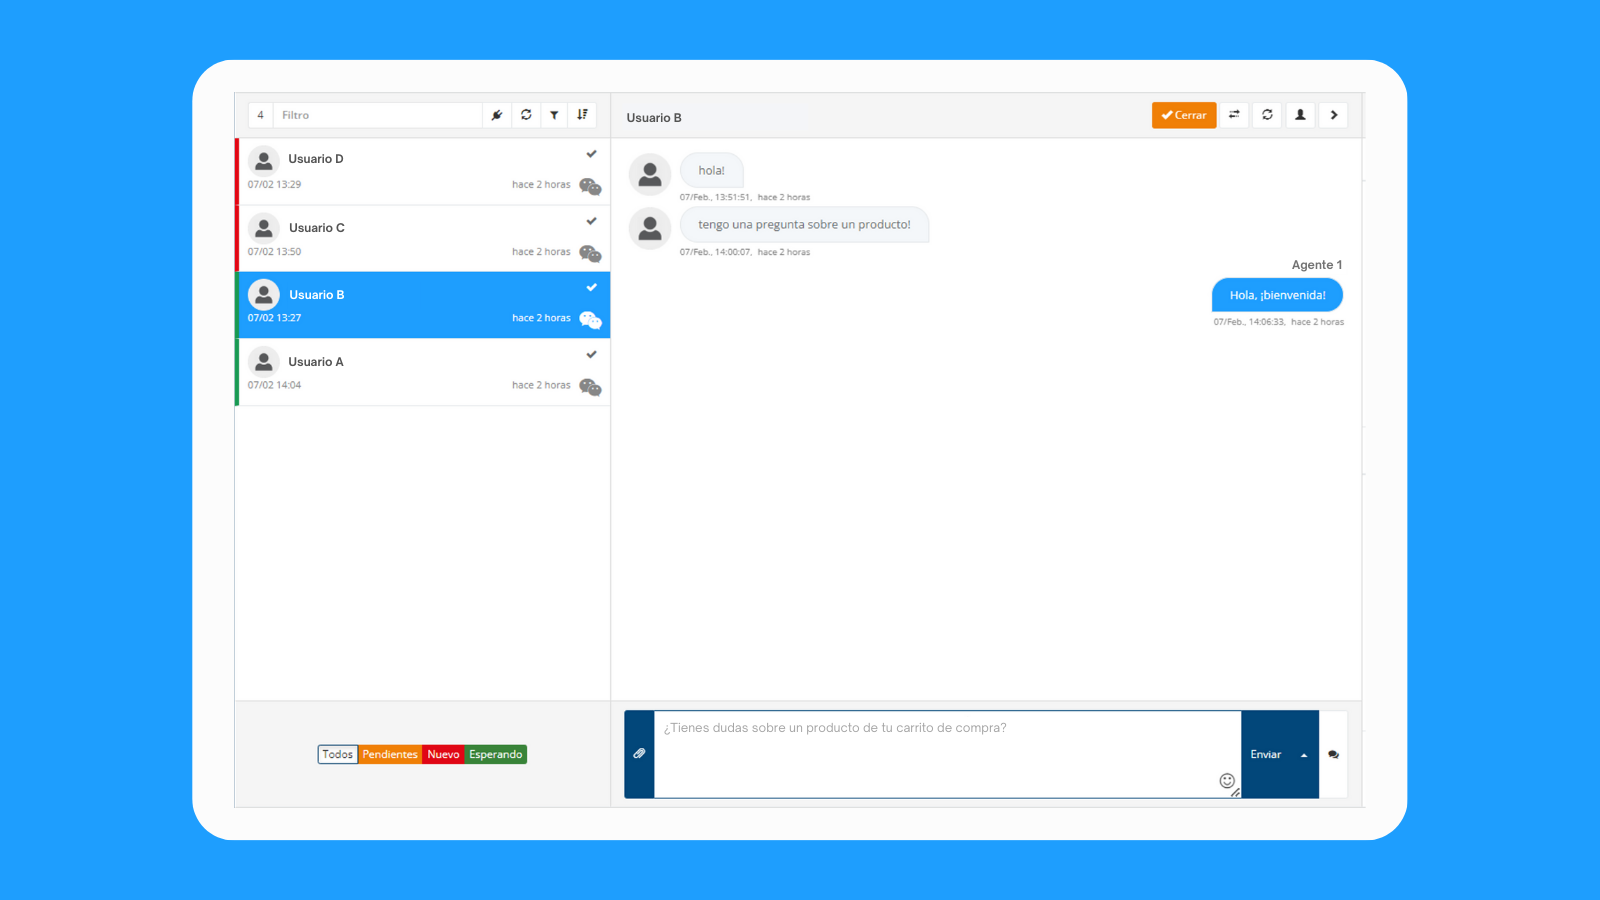 Manage all conversations in one single inbox